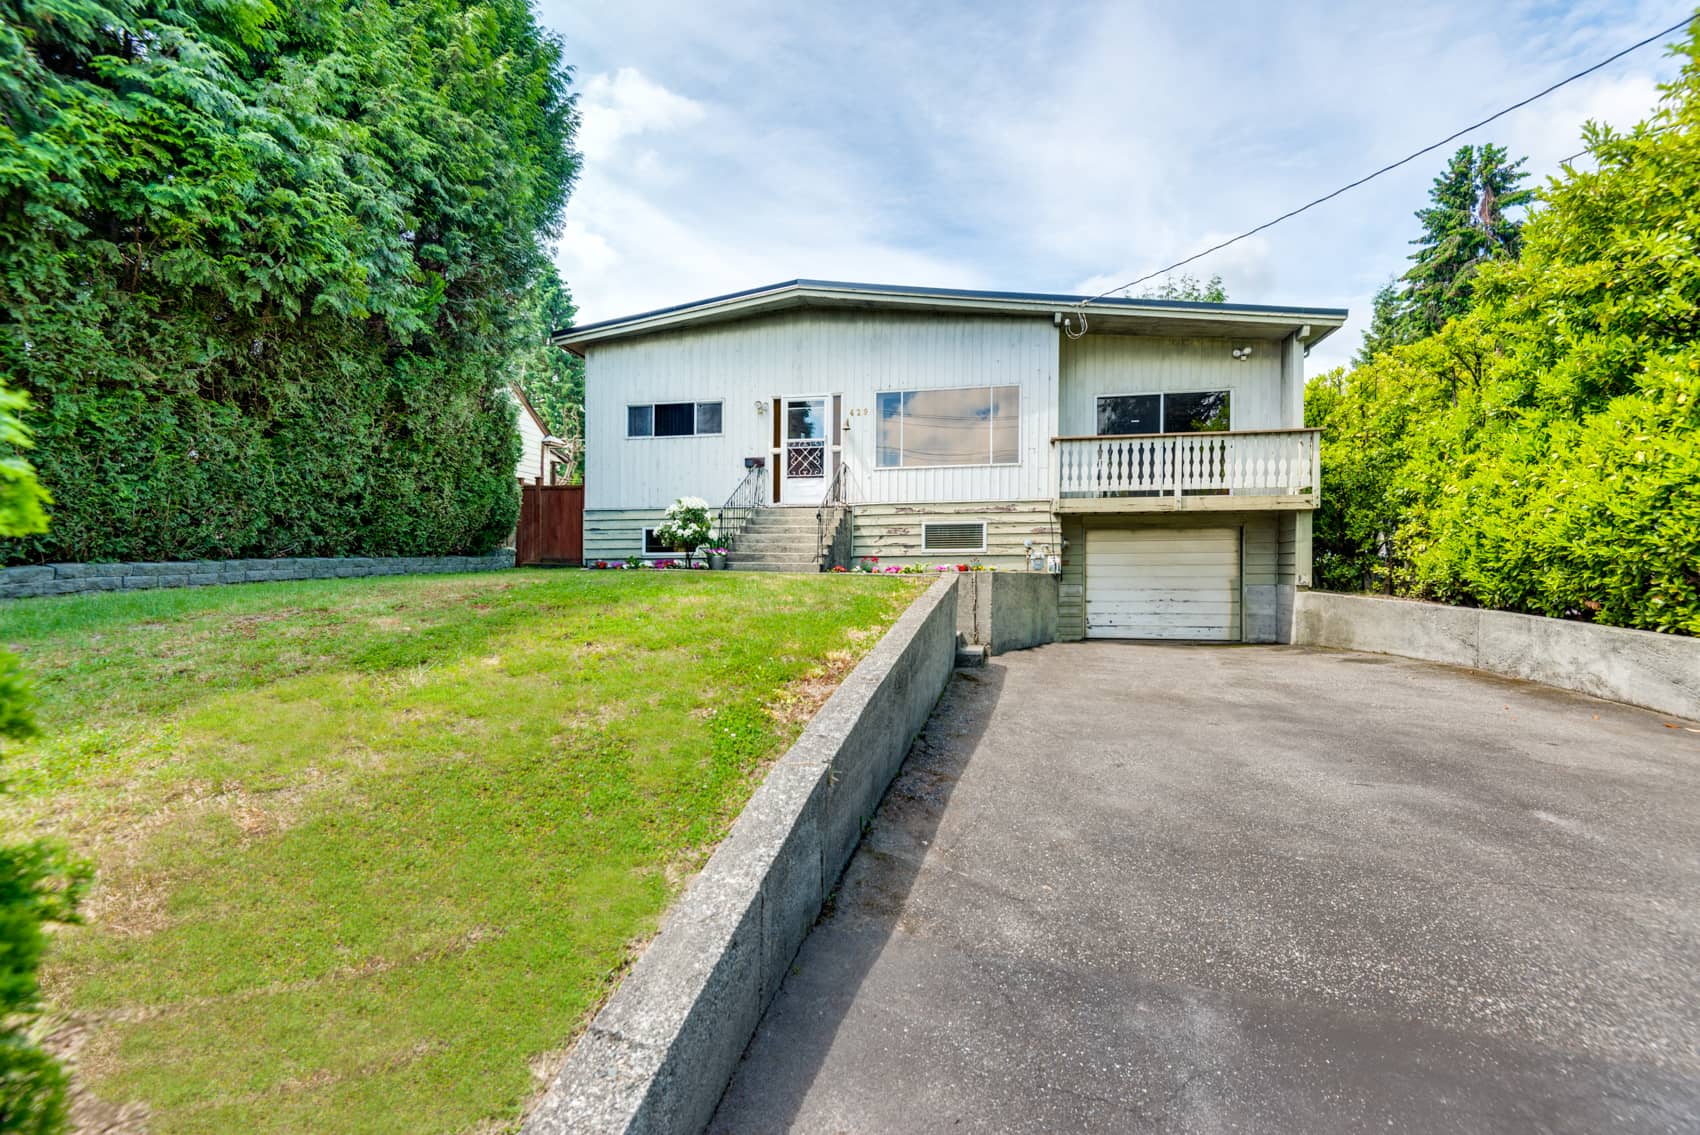 4 bed family home in The Heights, New Westminster